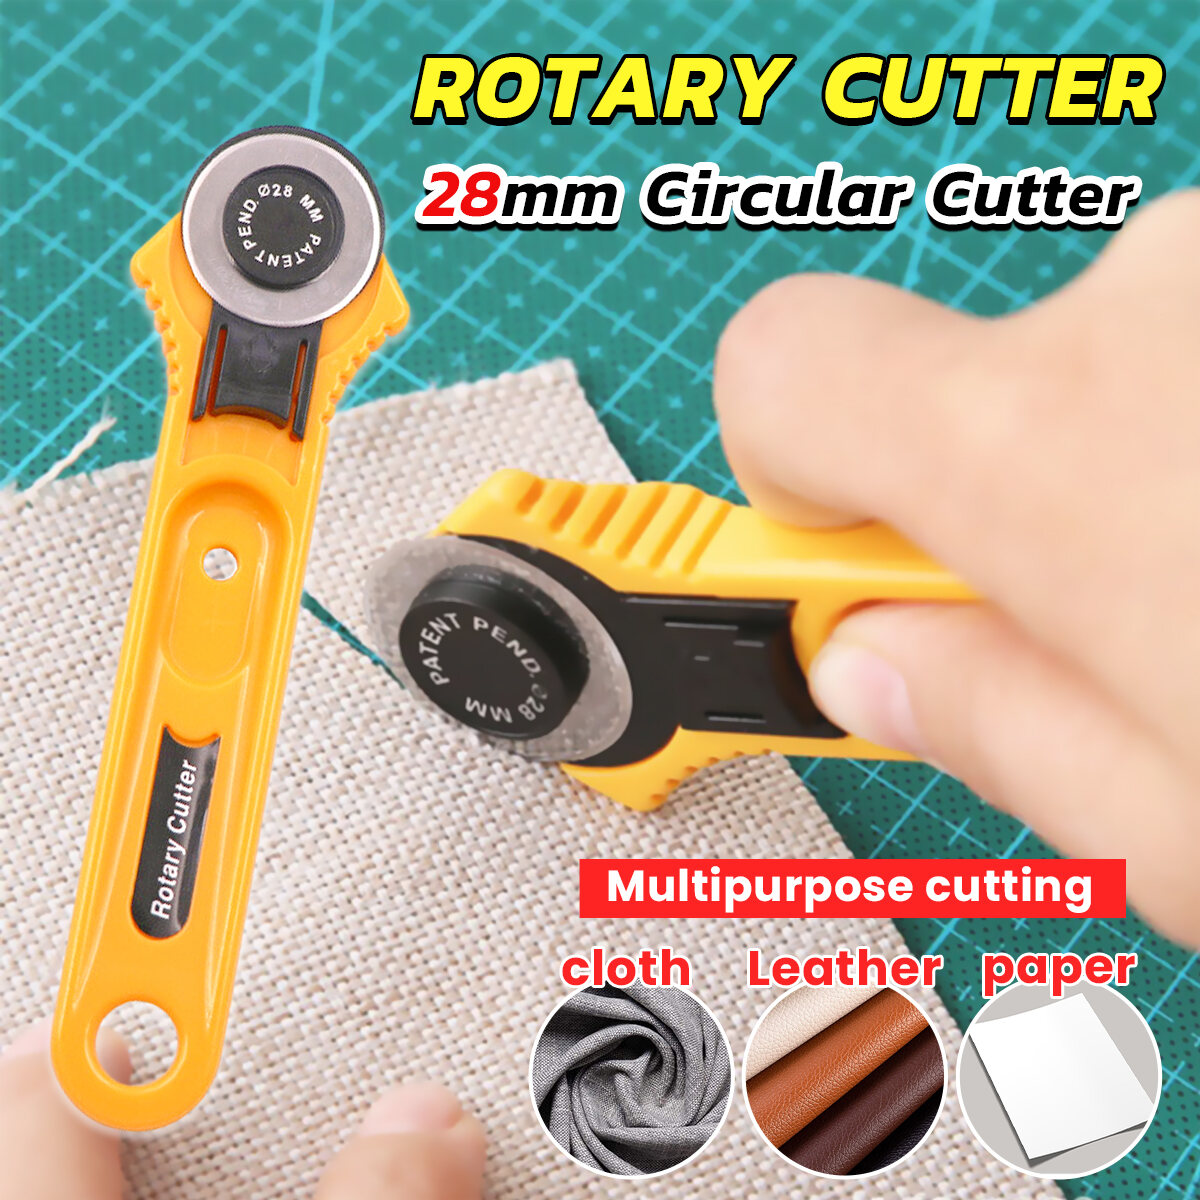 28MM Rotary Roller Cutter Cut Fabric Leather Vinyl Paper clothes Craft  Patchwork,Rotary Cutter 28mm Fabric Paper Vinyl Circular Cut Blade  Patchwork